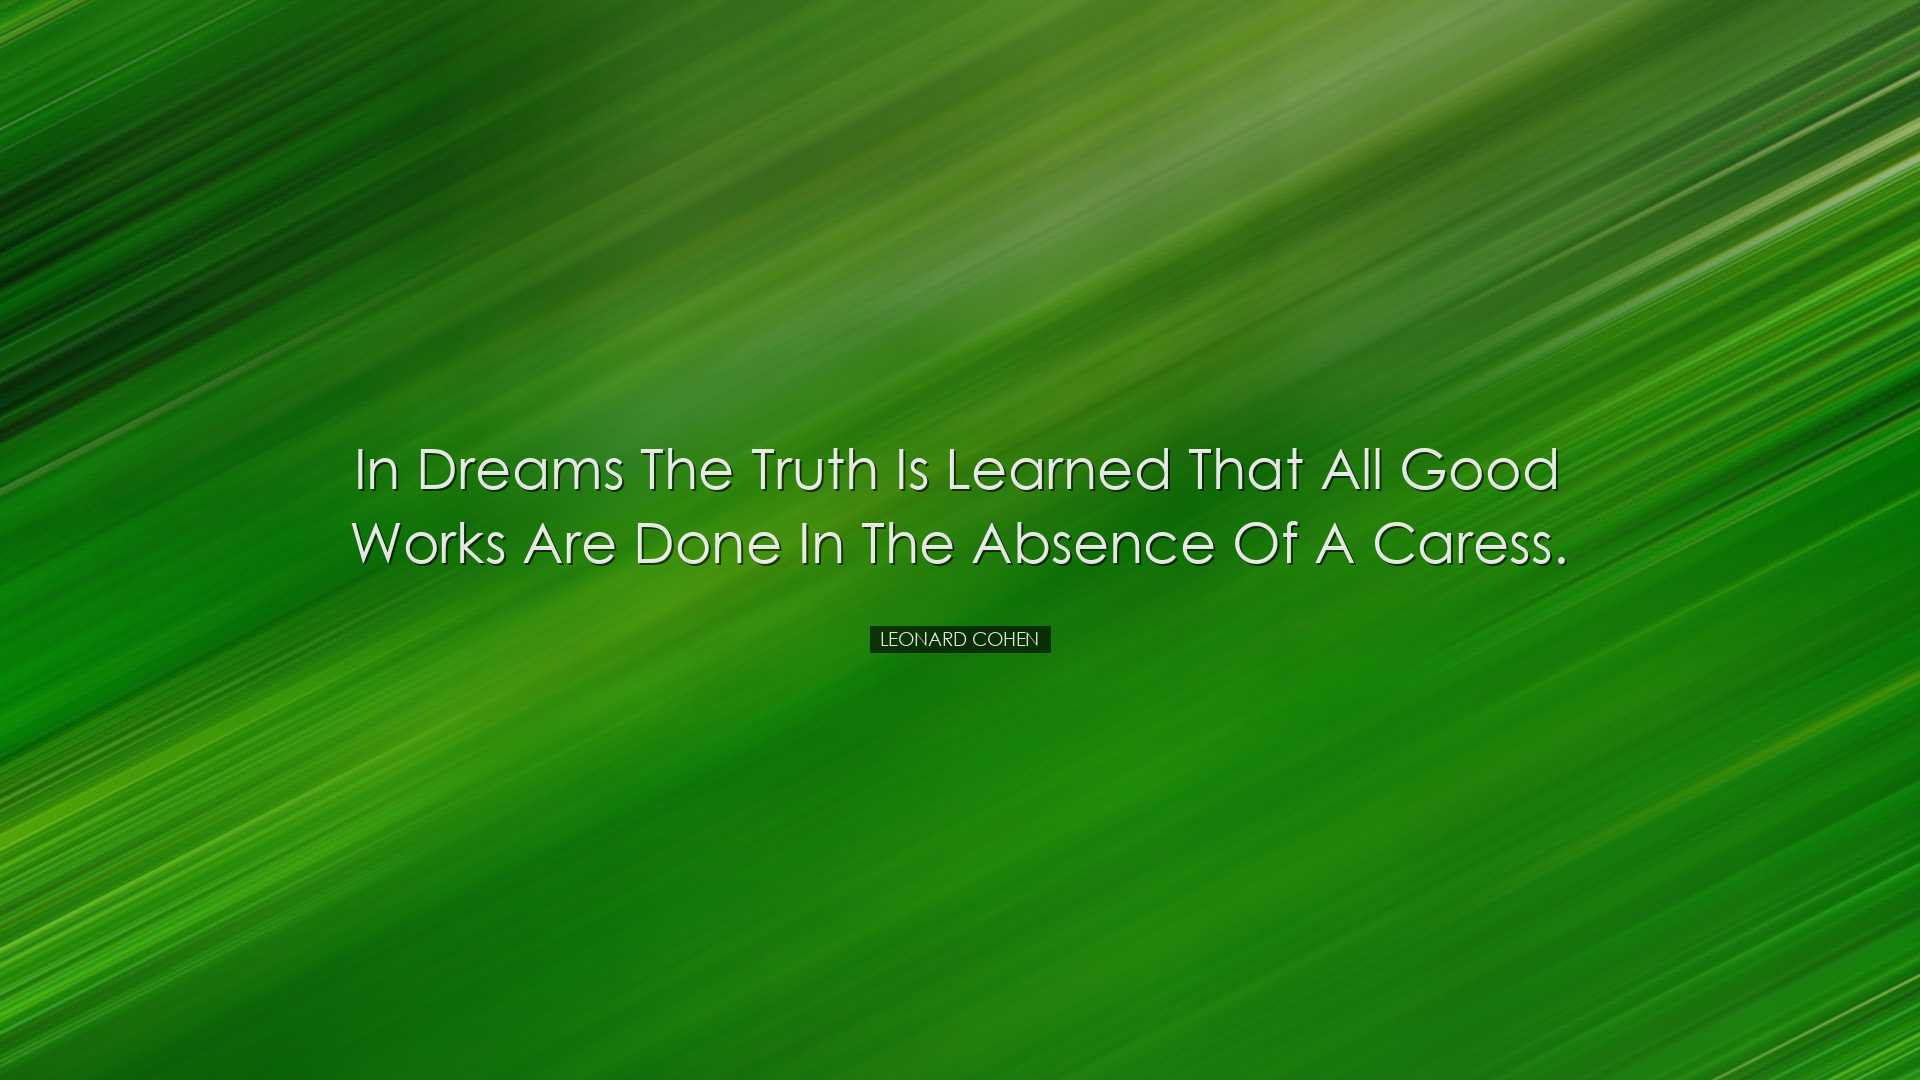 In dreams the truth is learned that all good works are done in the